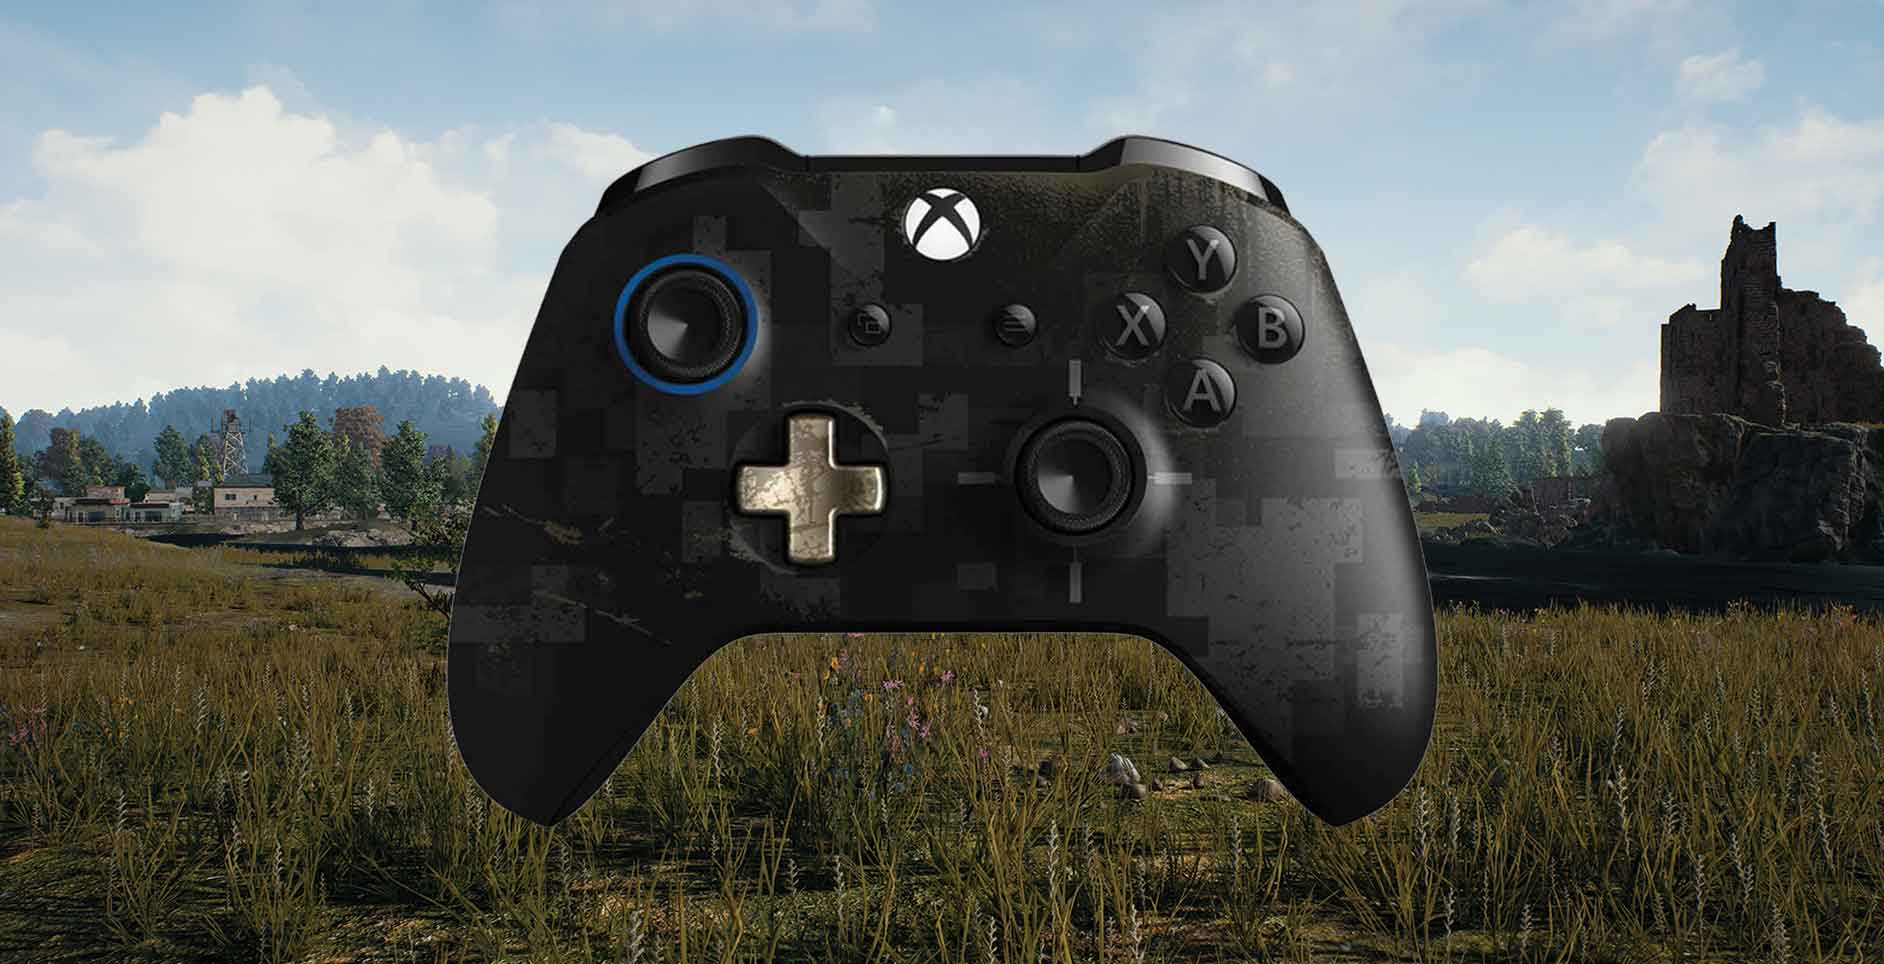 pubg for xbox one